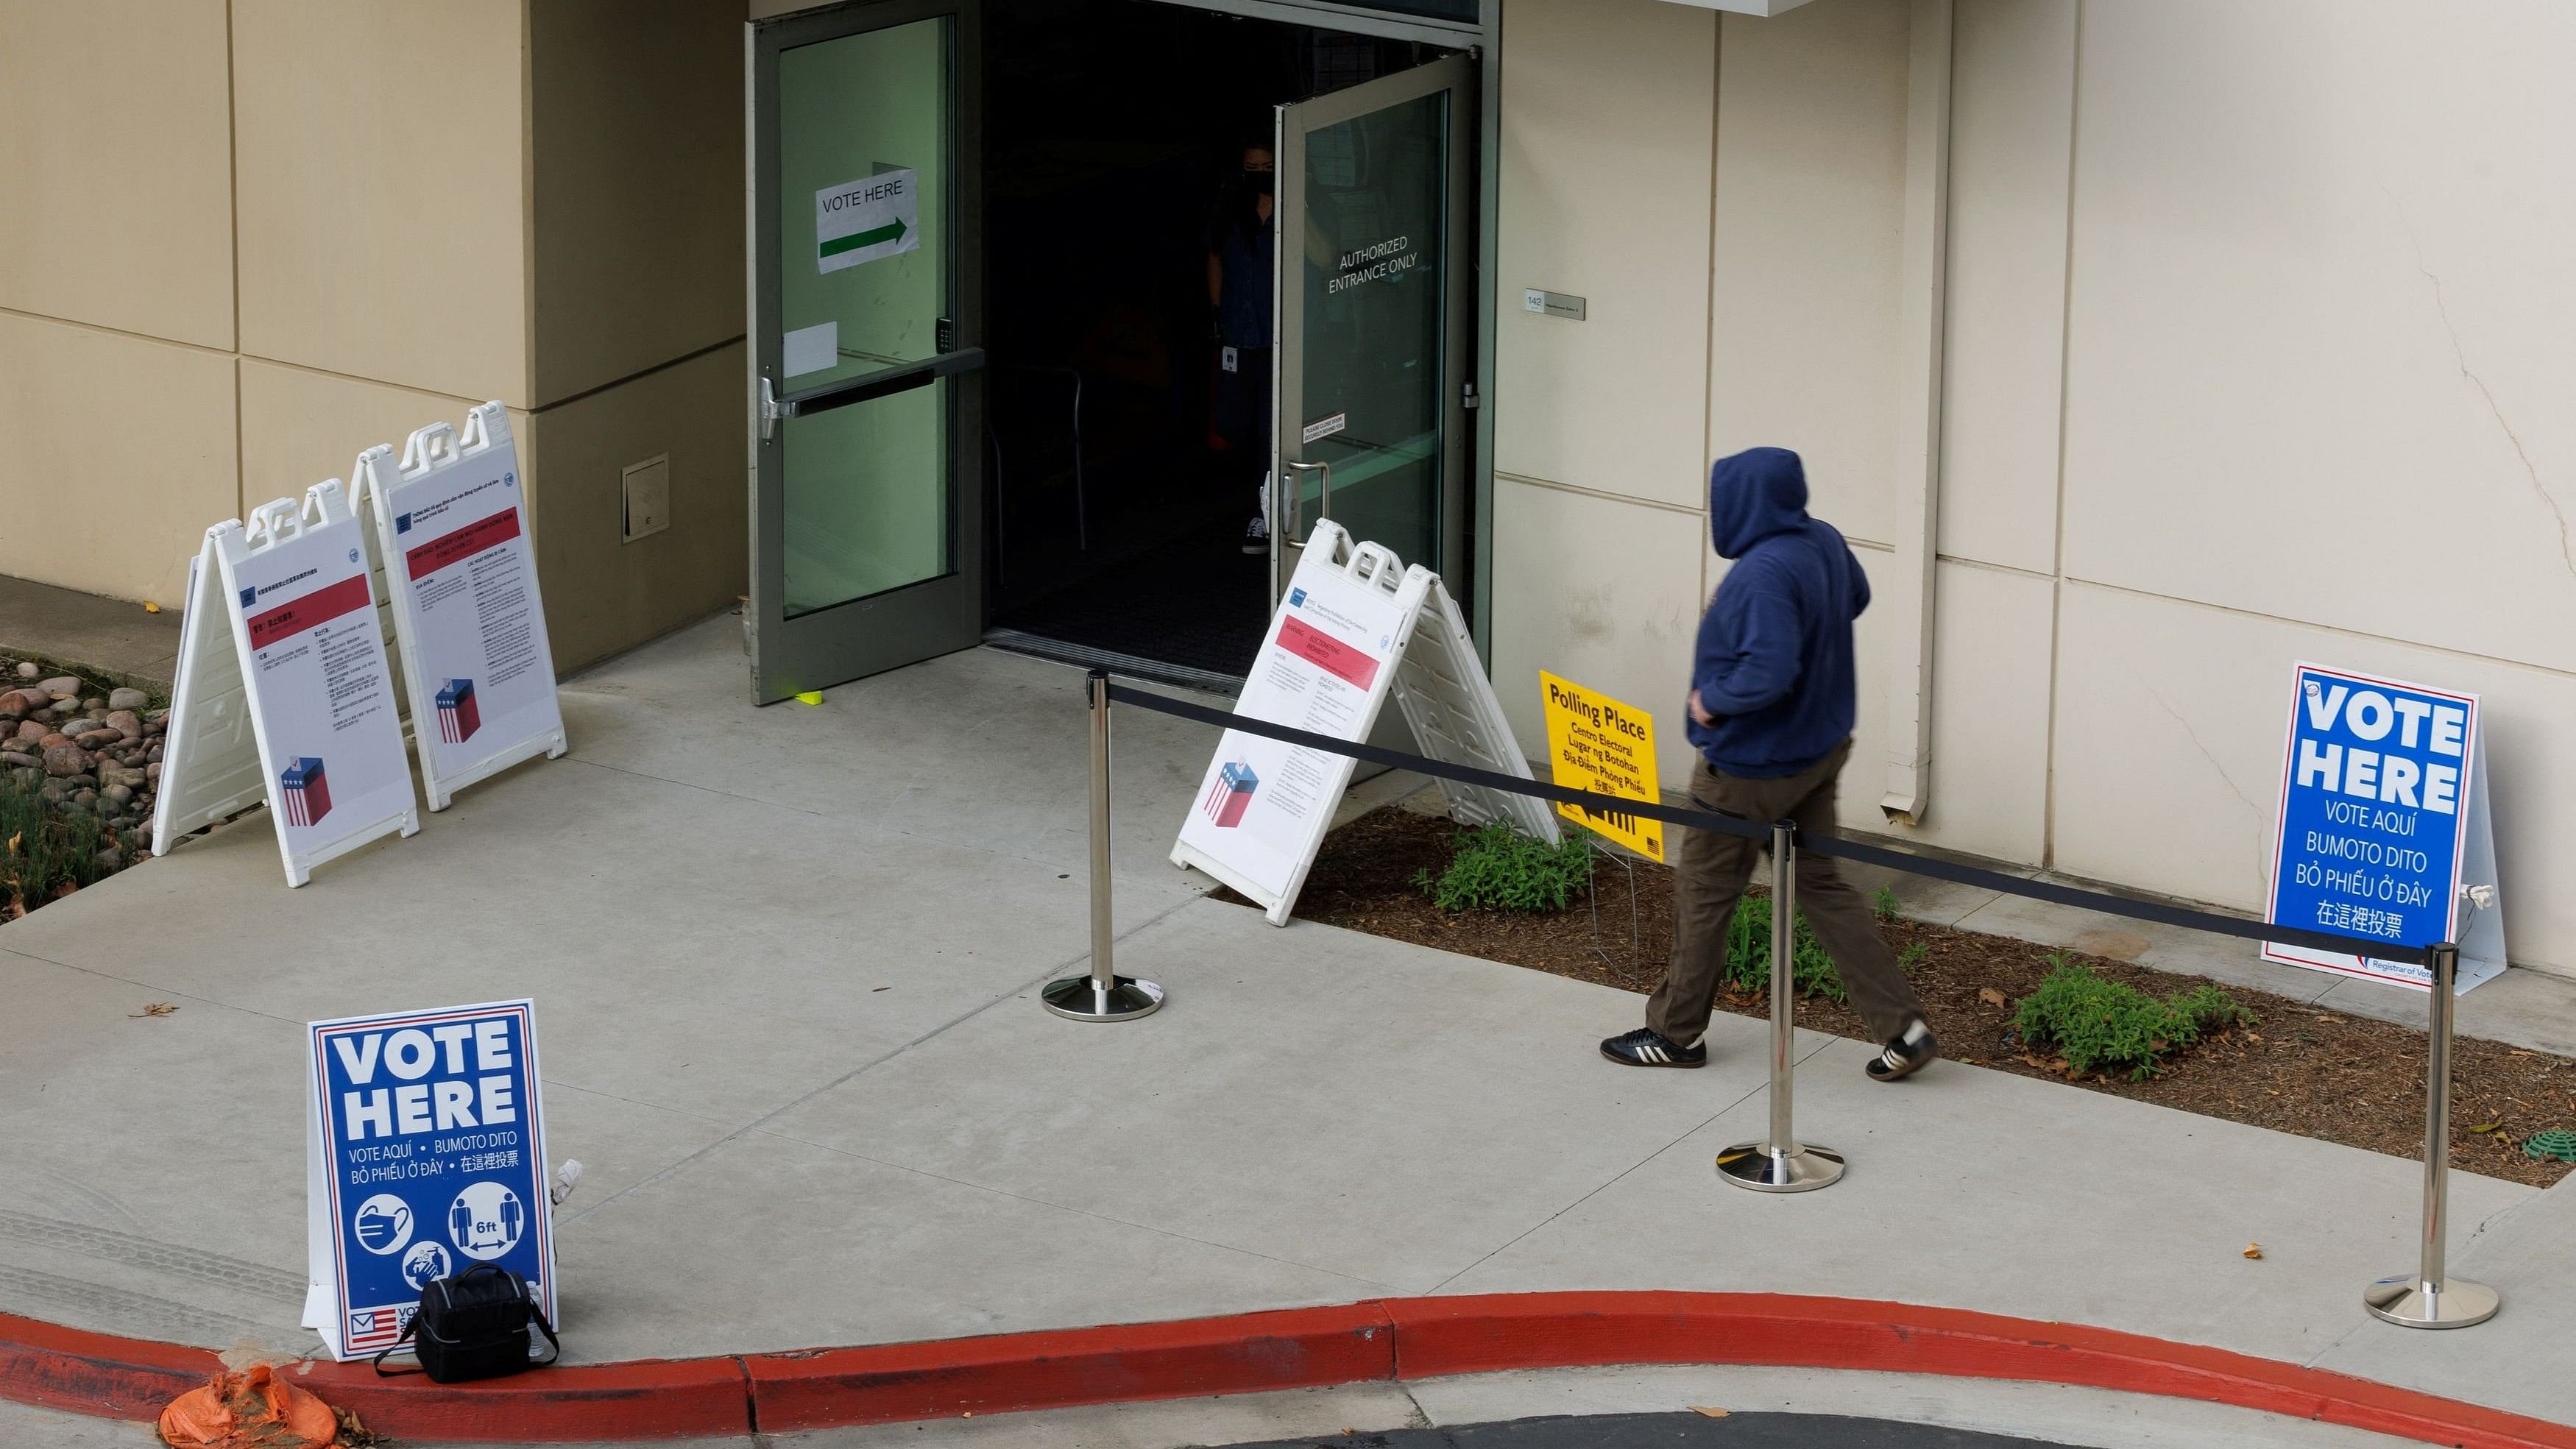 <div class="paragraphs"><p>A voter arrives at a polling station during the Super Tuesday primary election in San Diego, California.</p></div>